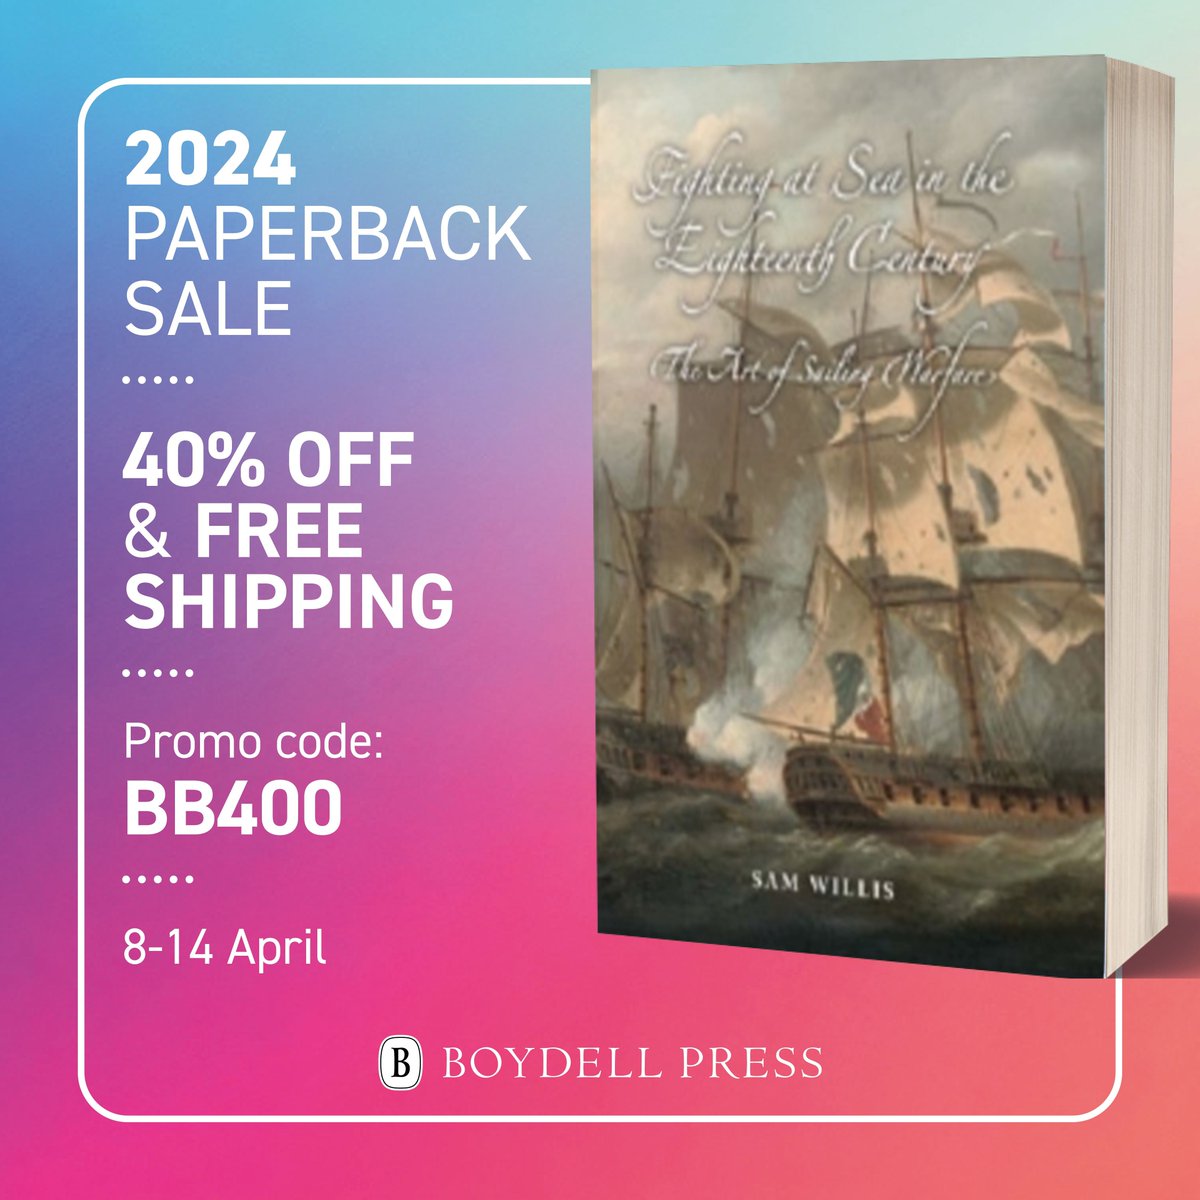 If Maritime history is your thing, be sure not to miss 40% off and free shipping on all our maritime paperbacks including 'Fighting at Sea in the Eighteenth Century'... Browse the sale here: buff.ly/3vpTP13 #BookSale #Maritime #History